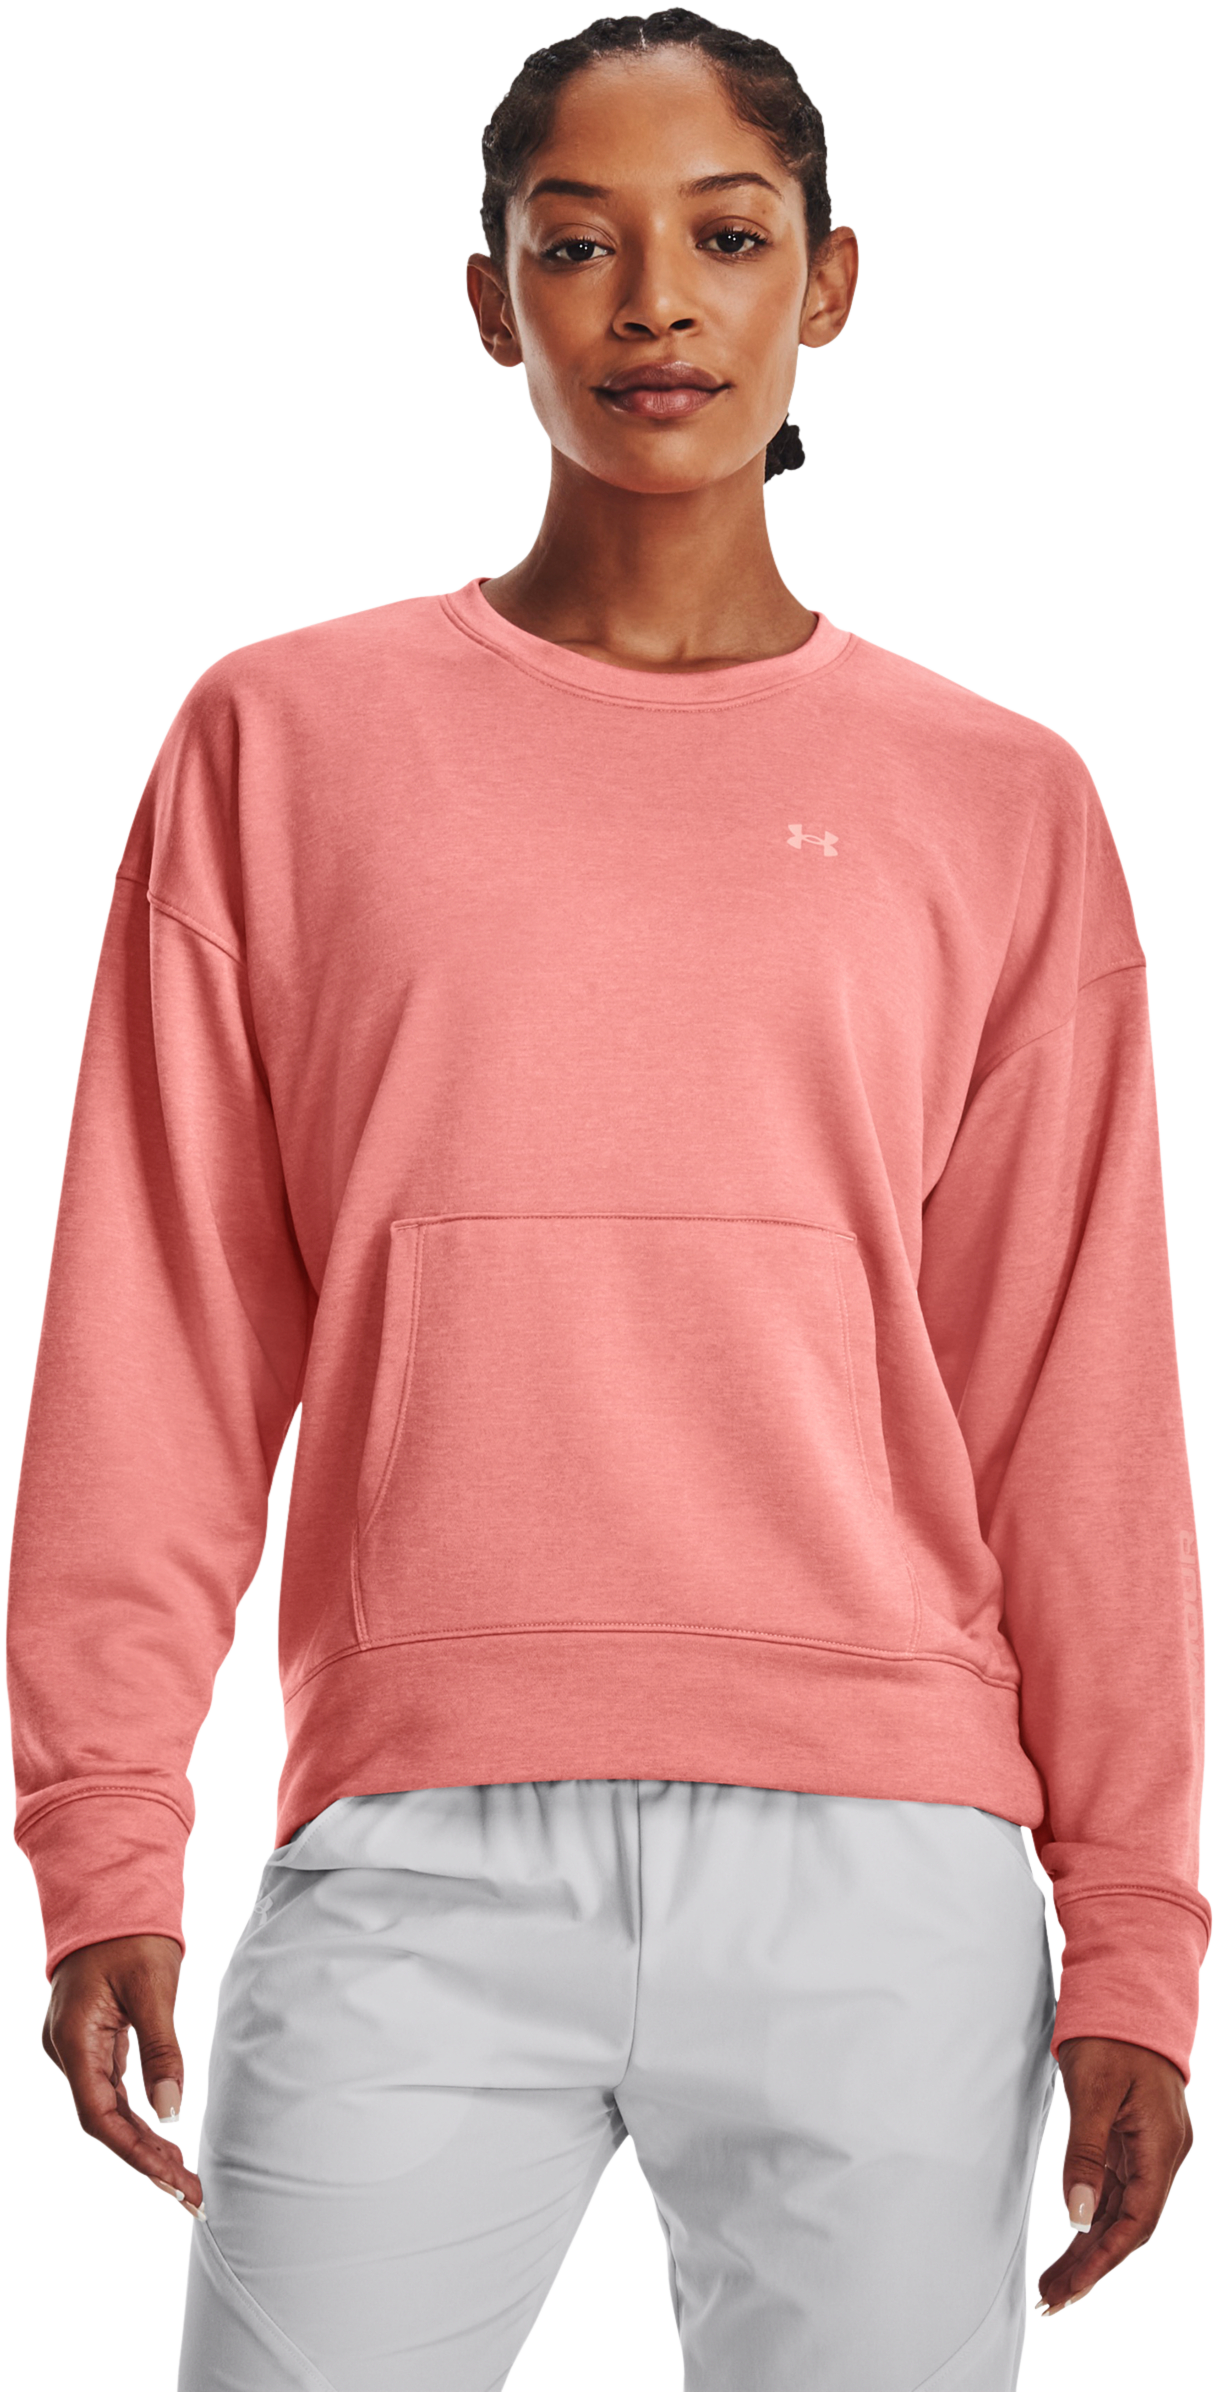 Under Armor Pullover Women's Authentic Quality